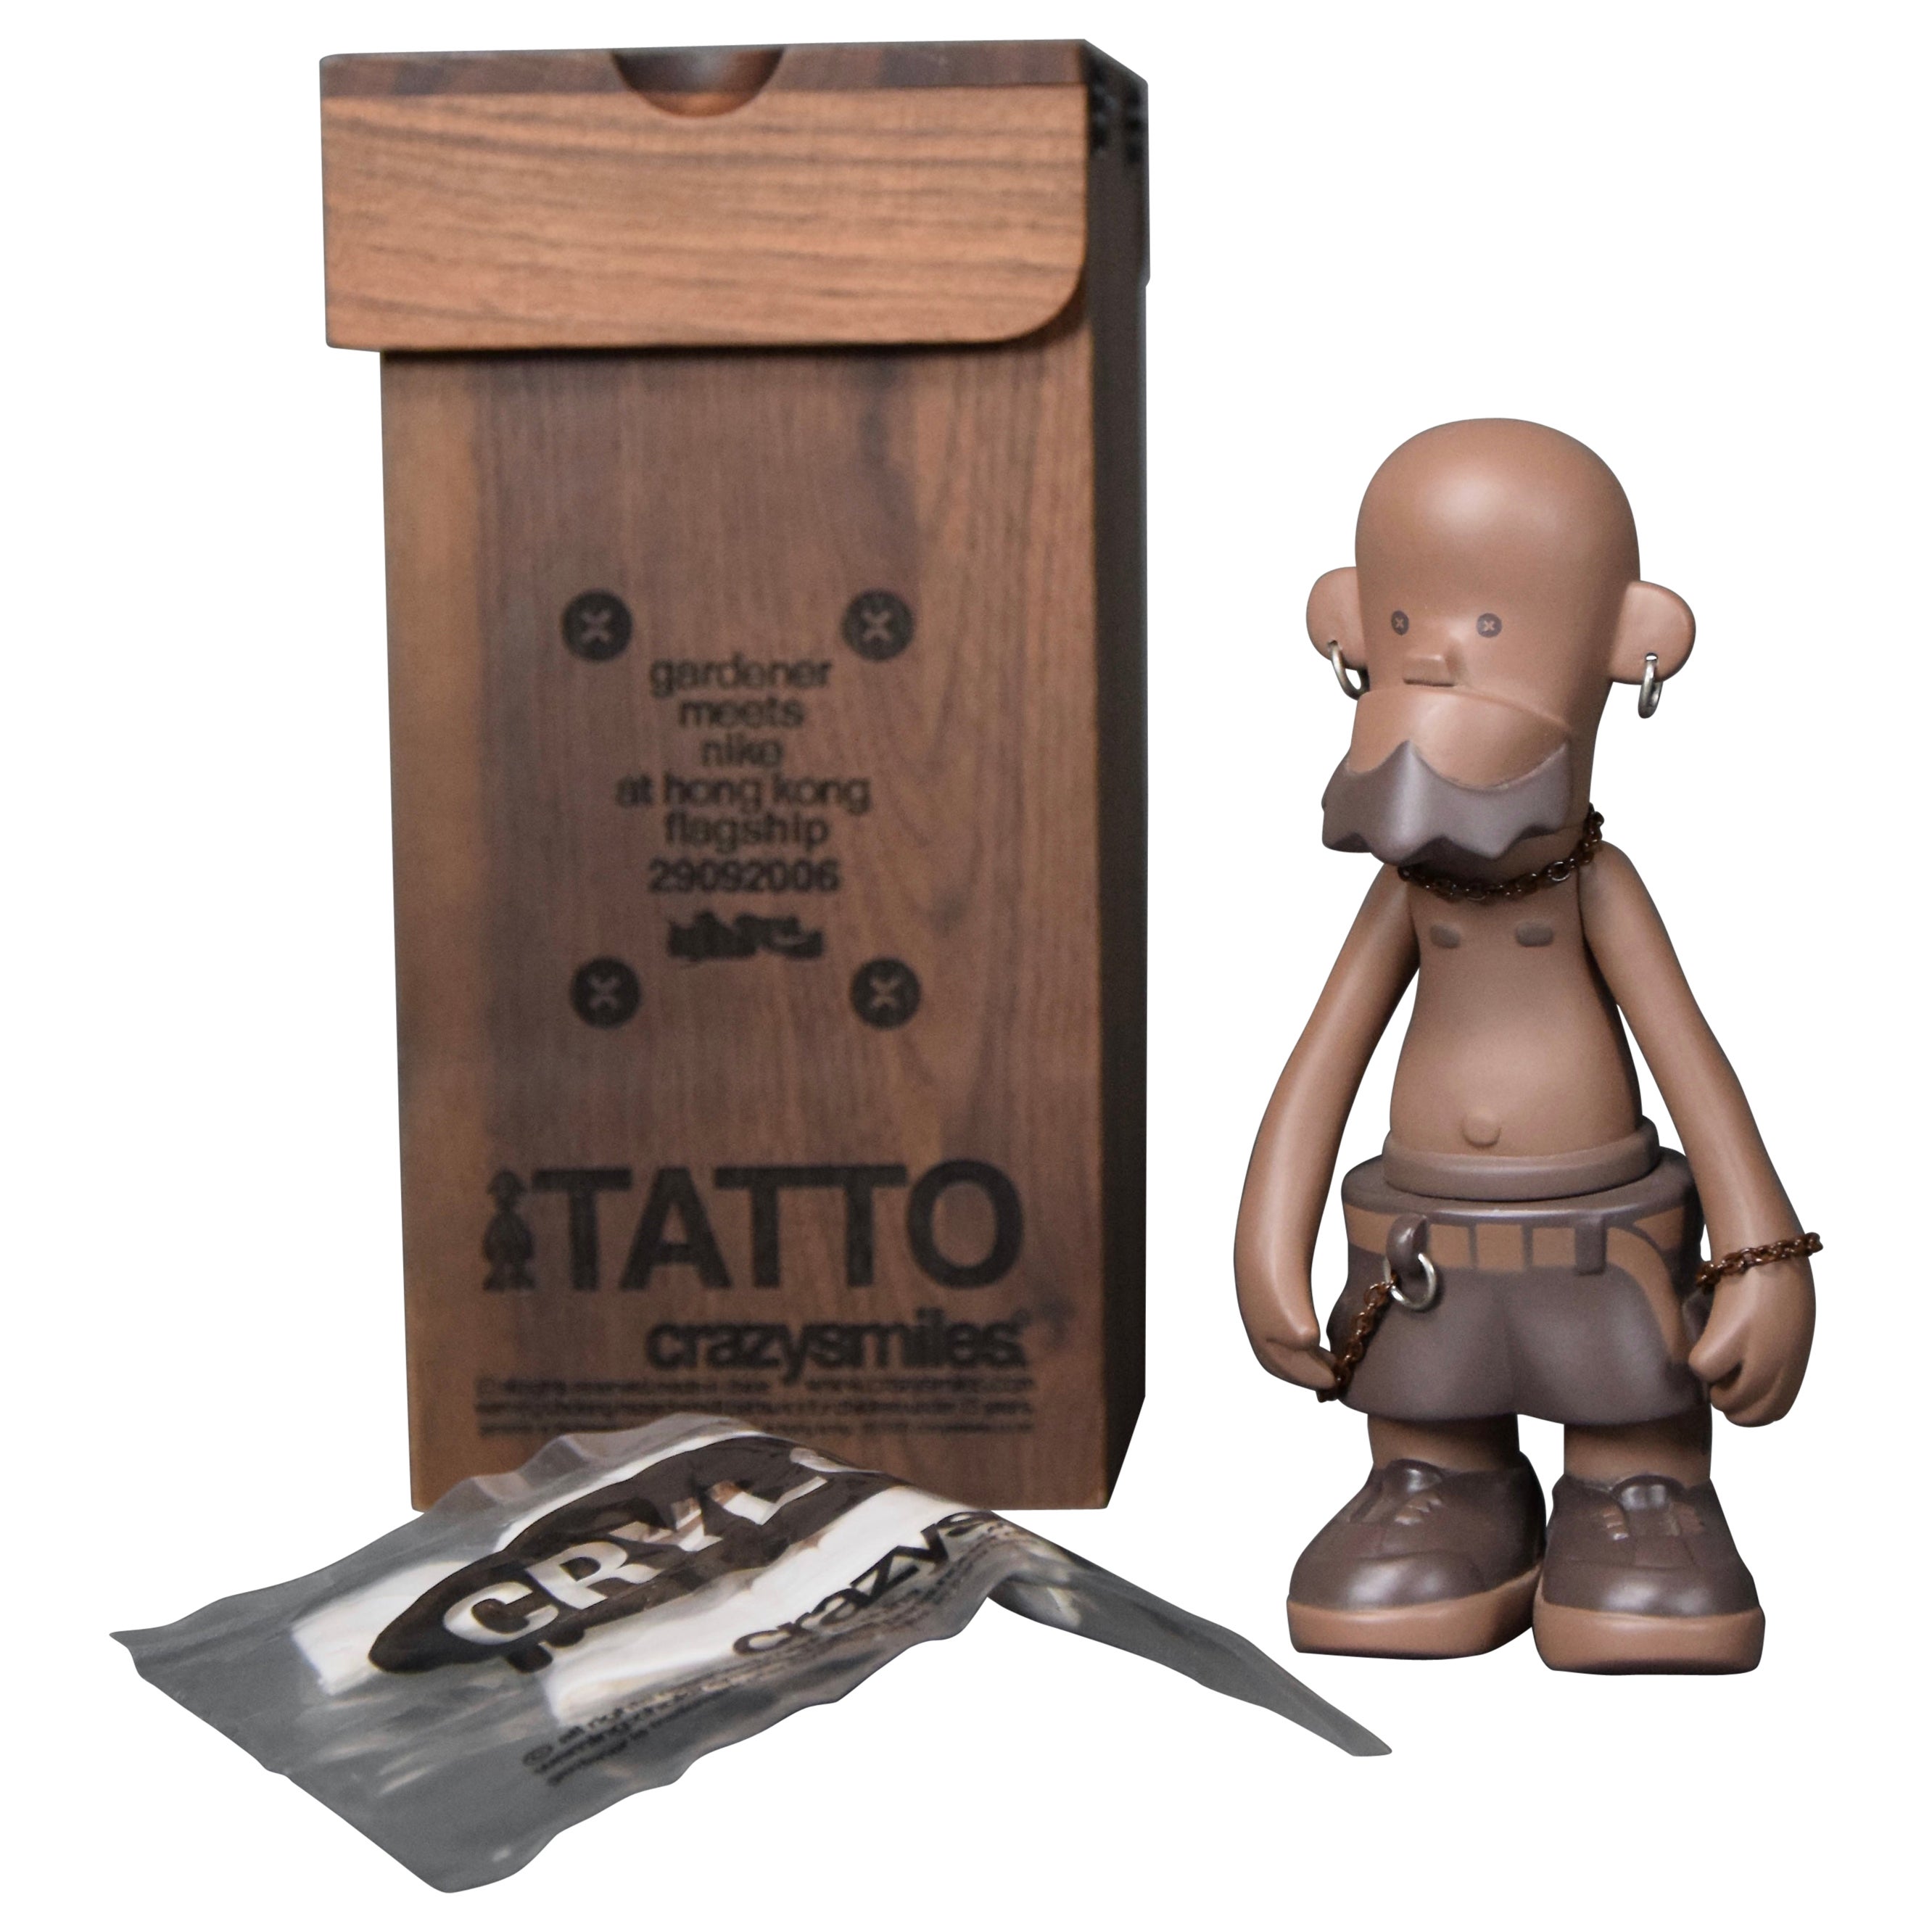 Tatto Limited Edition Gardener Meets NIKE 2006 Designer Toy For Sale